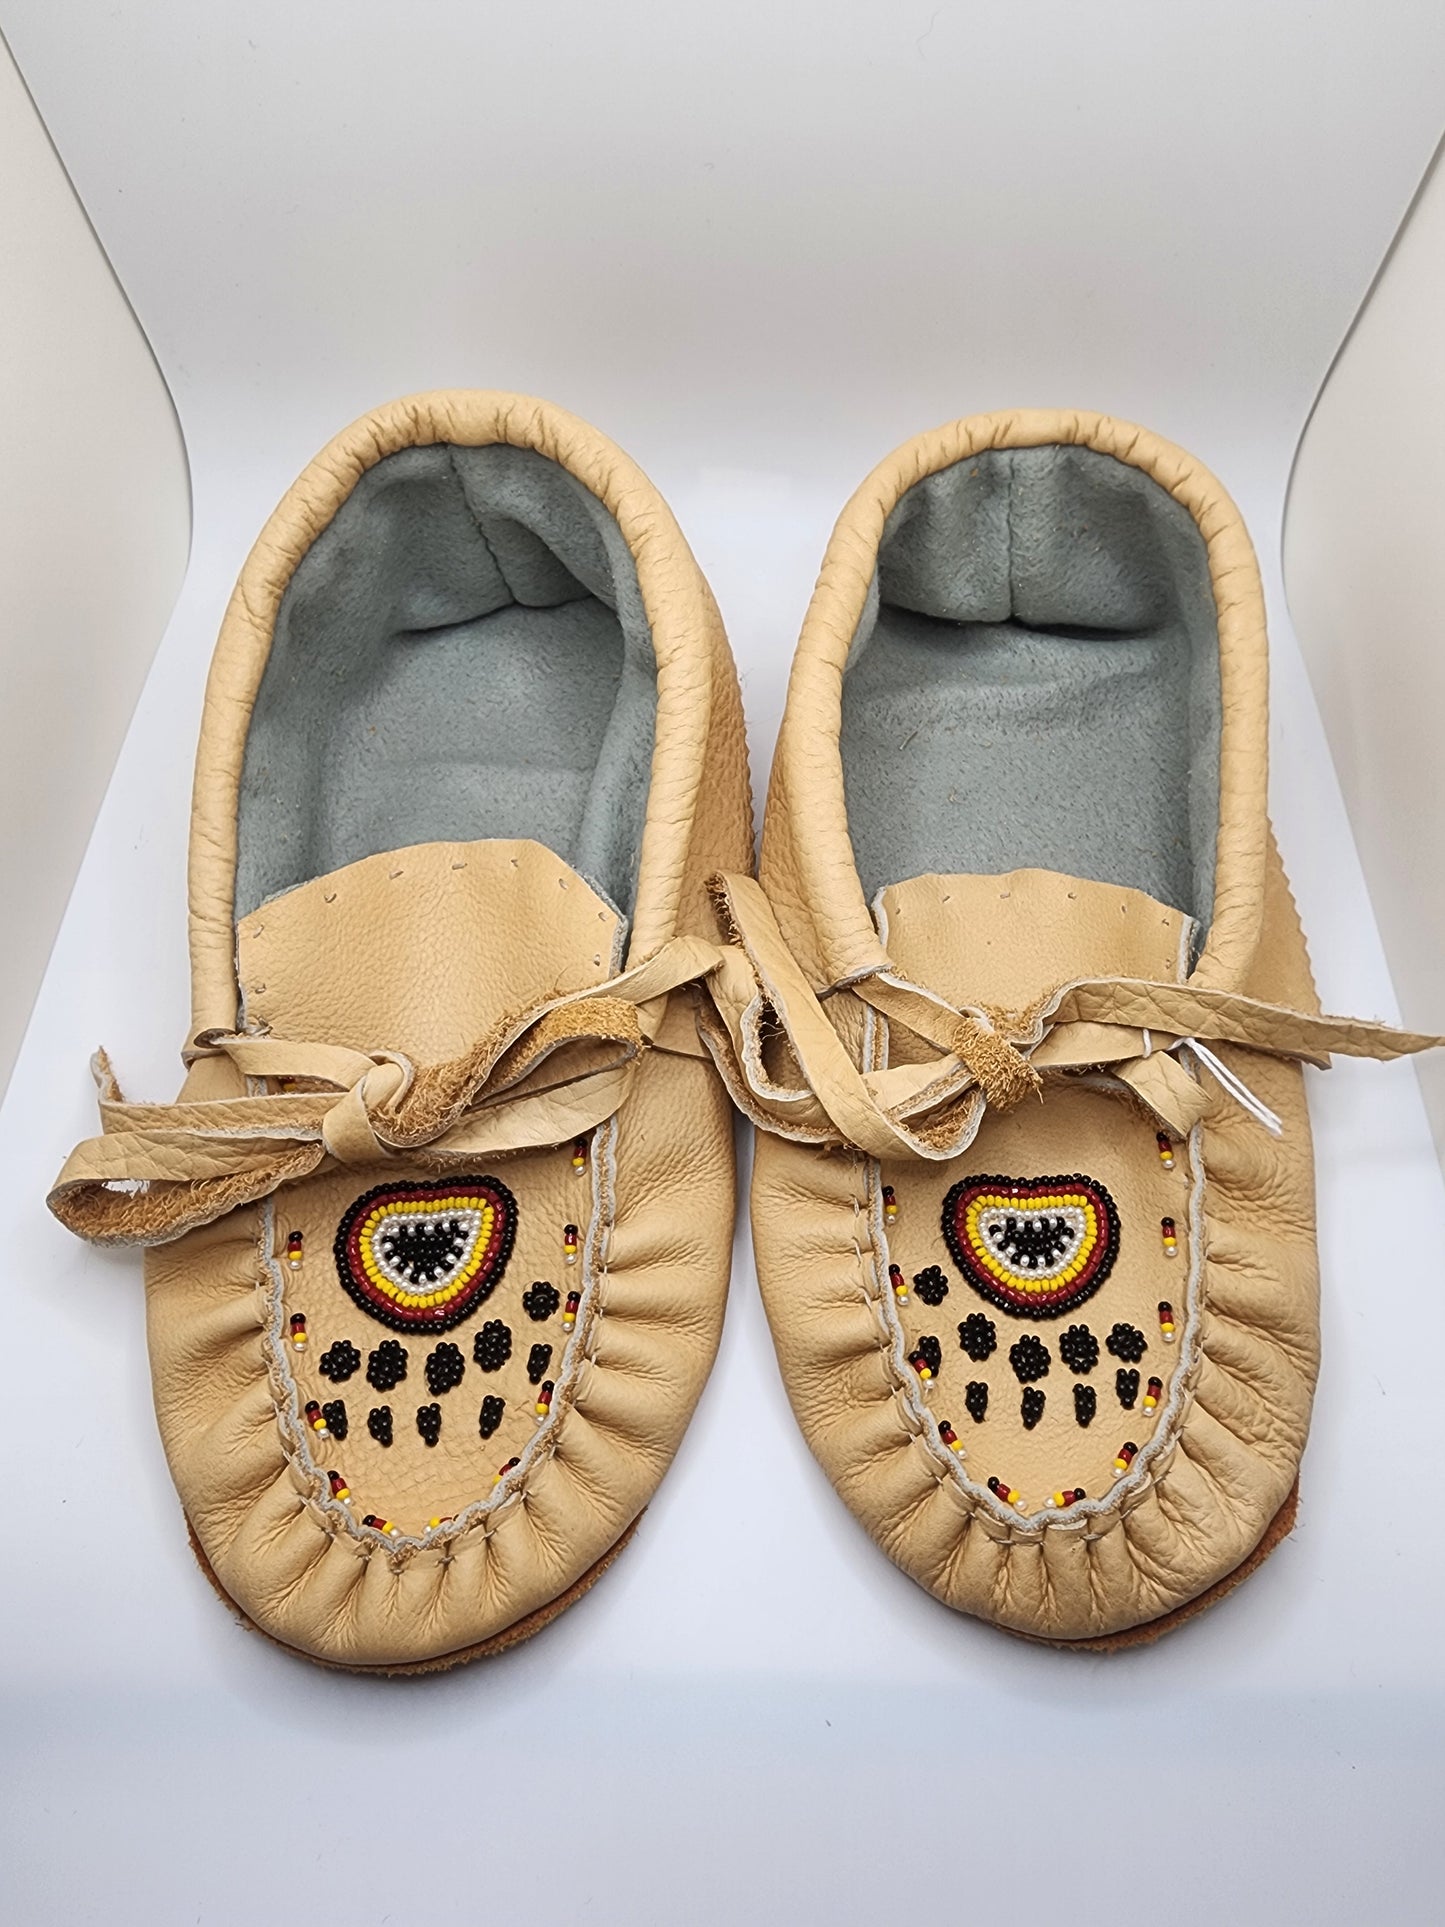 Leather Moccasins - Size 7(U.S.) - with Beaded Bear Paw Design